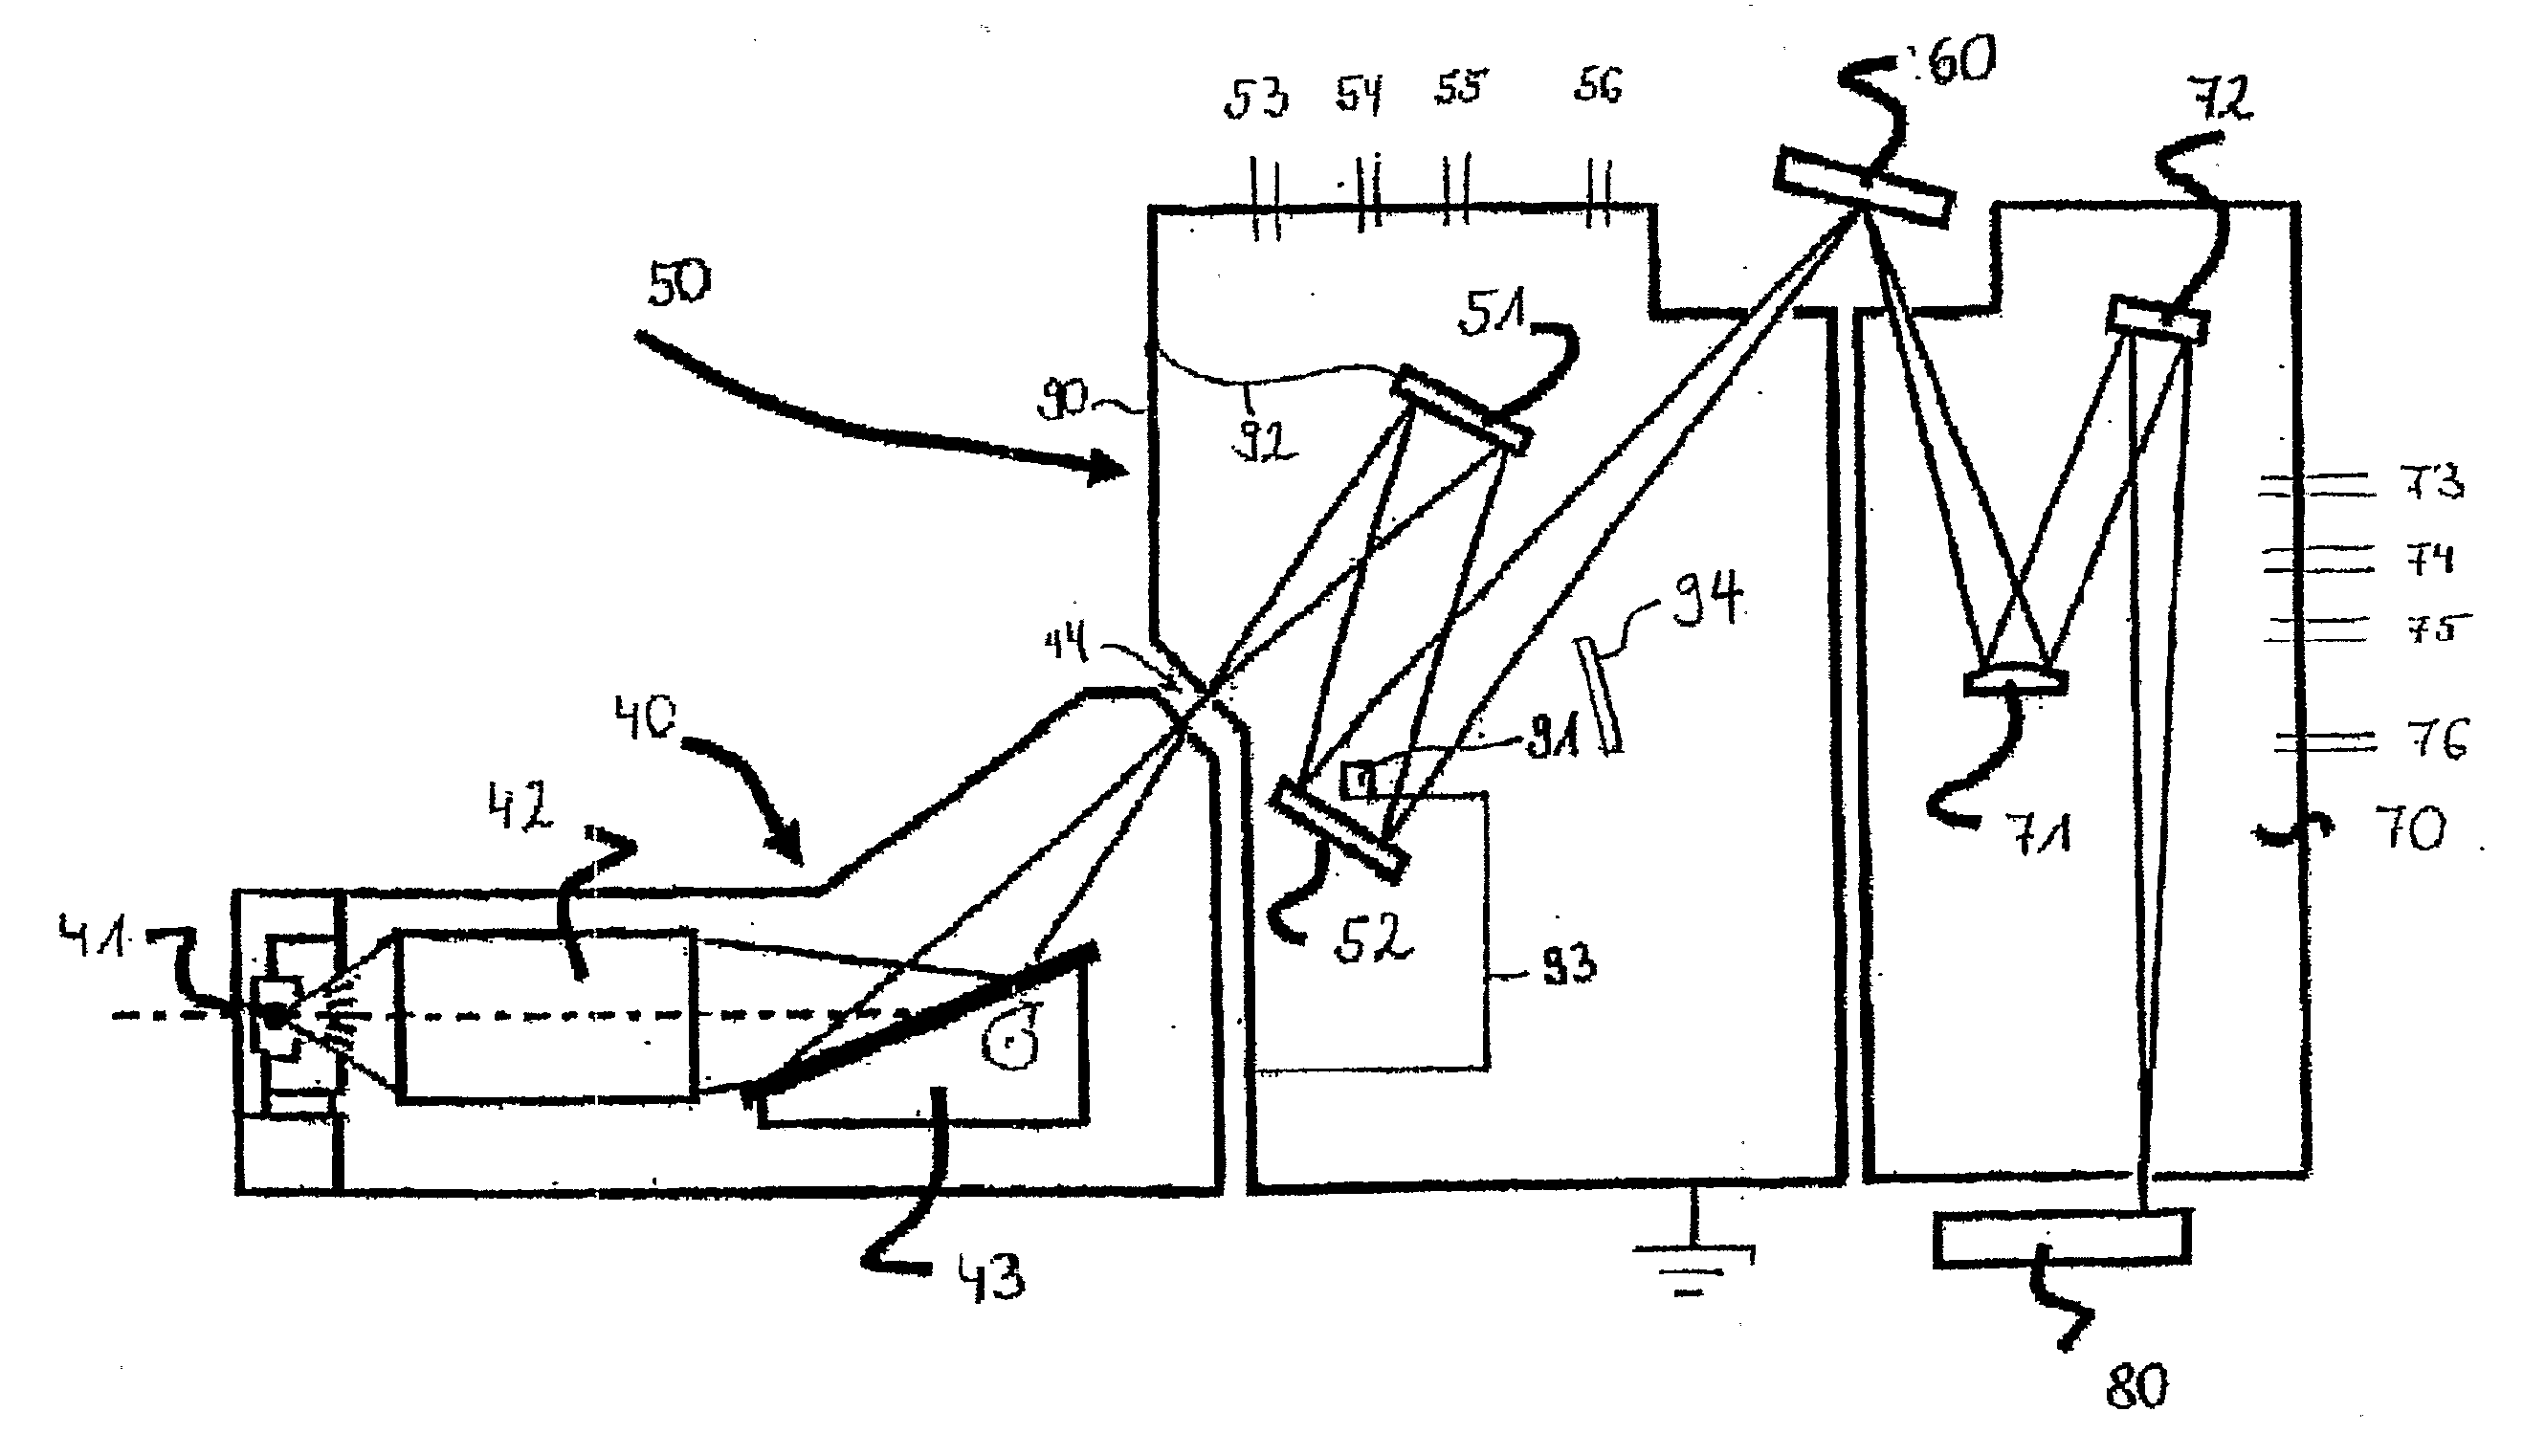 Method For Manufacturing Reflective Optical Element, Reflective Optical Elements, Euv-Lithography Apparatus And Methods For Operating Optical Elements And Euv-Lithography Apparatus, Methods For Determining The Phase Shift, Methods For Determining The Layer Thickness, And Apparatuses For Carrying Out The Methods